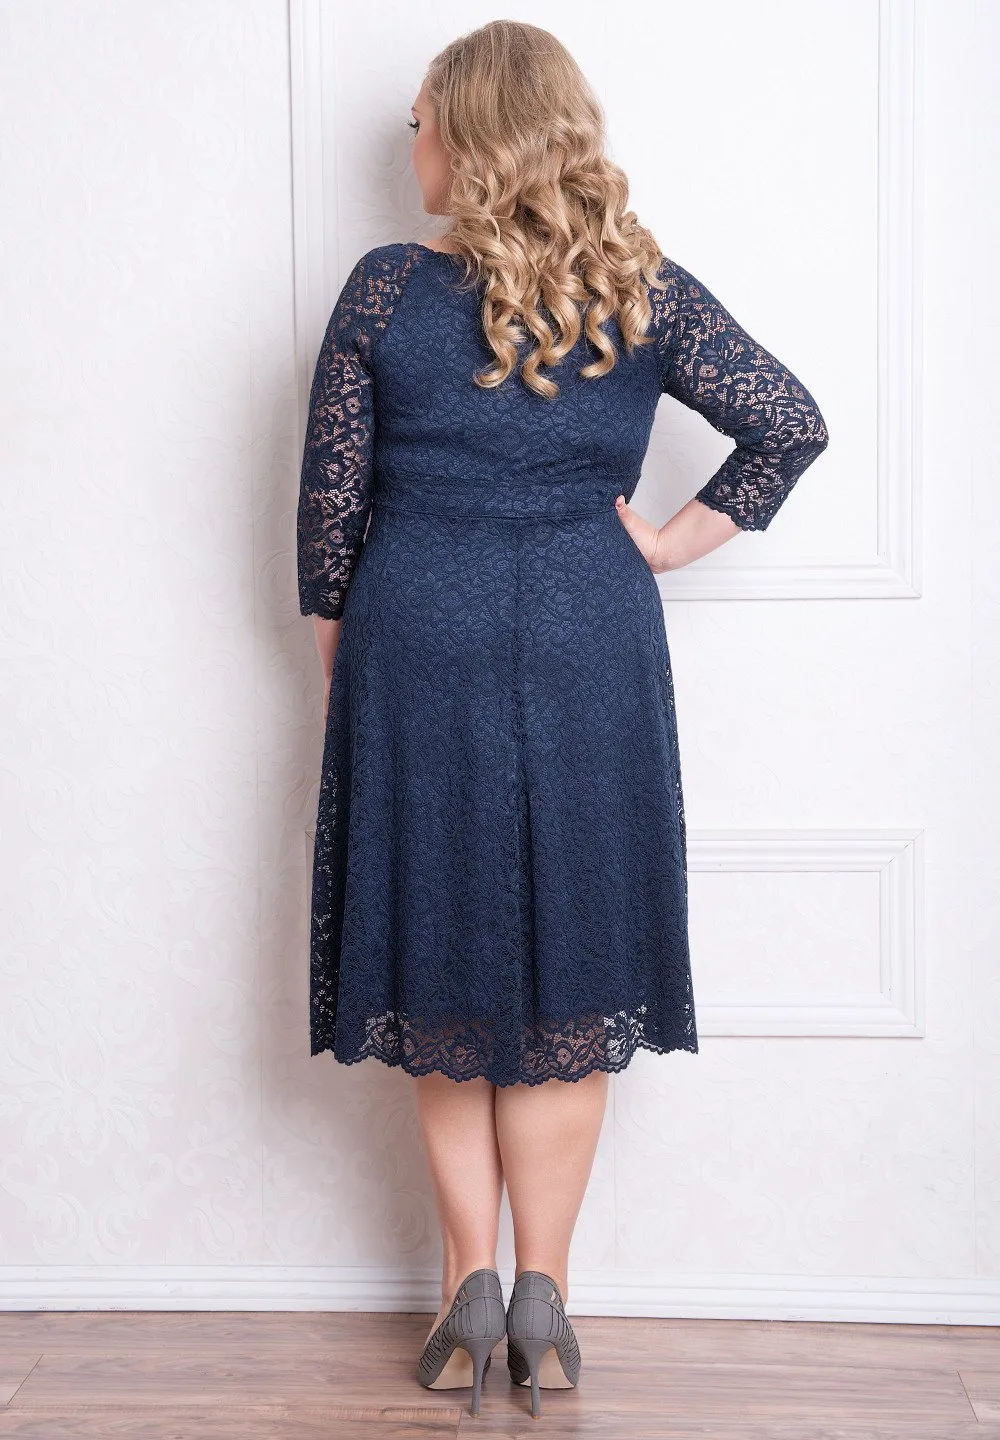 Cheap Dark Navy Lace Country Bridesmaids Dresses With Long Sleeves V Neck Wedding Guest Dress Knee Length Maid Of Honor Gowns